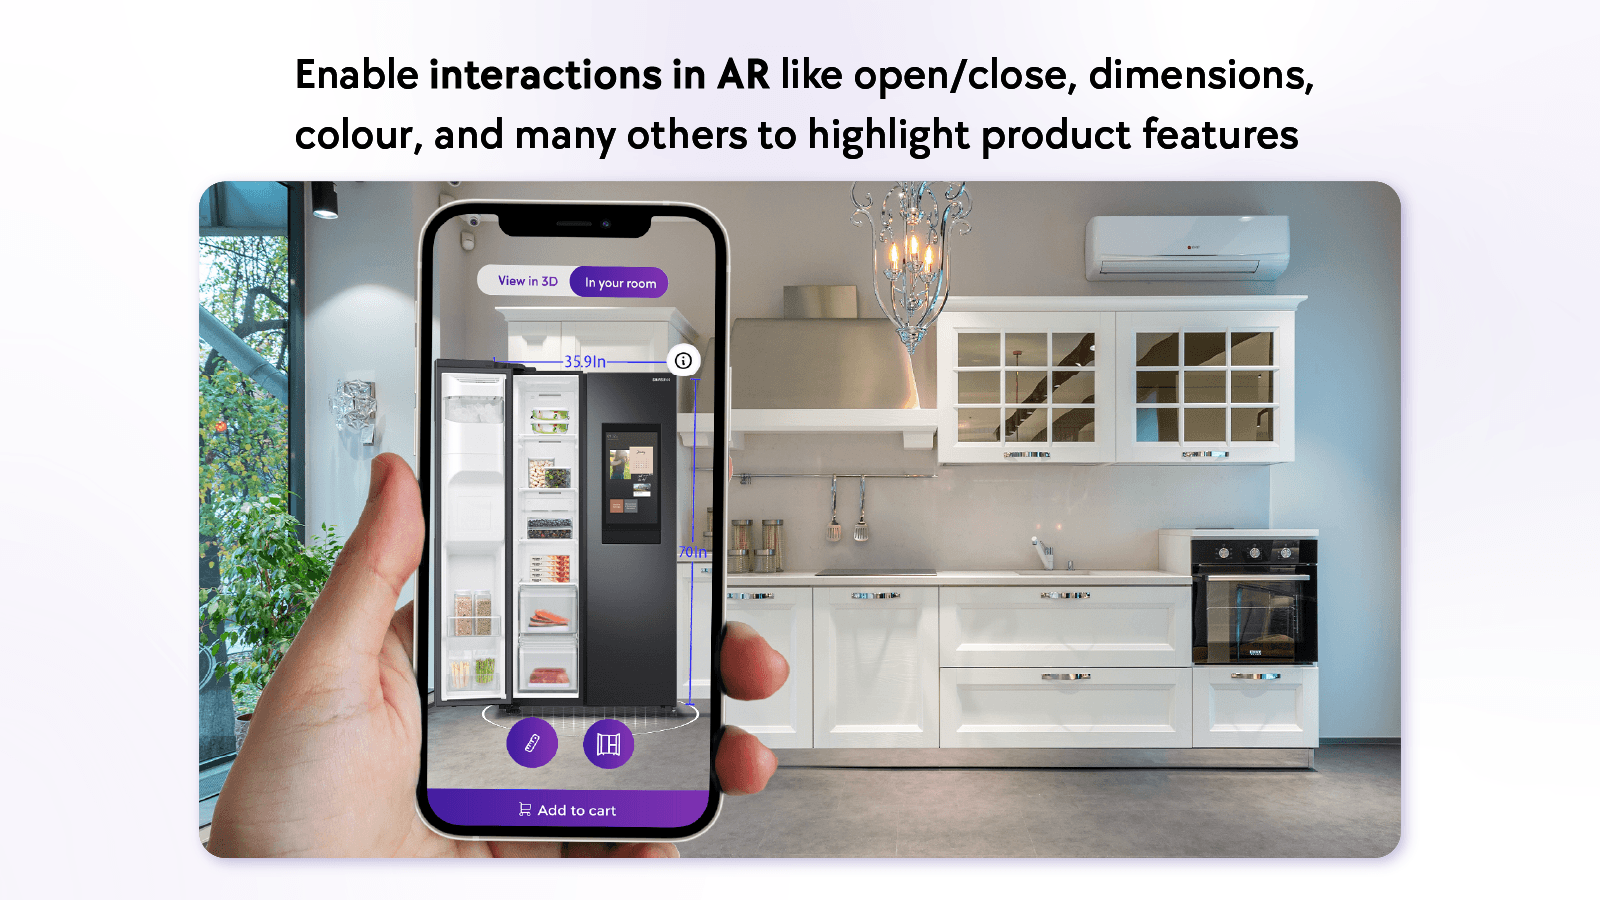 Product features in AR